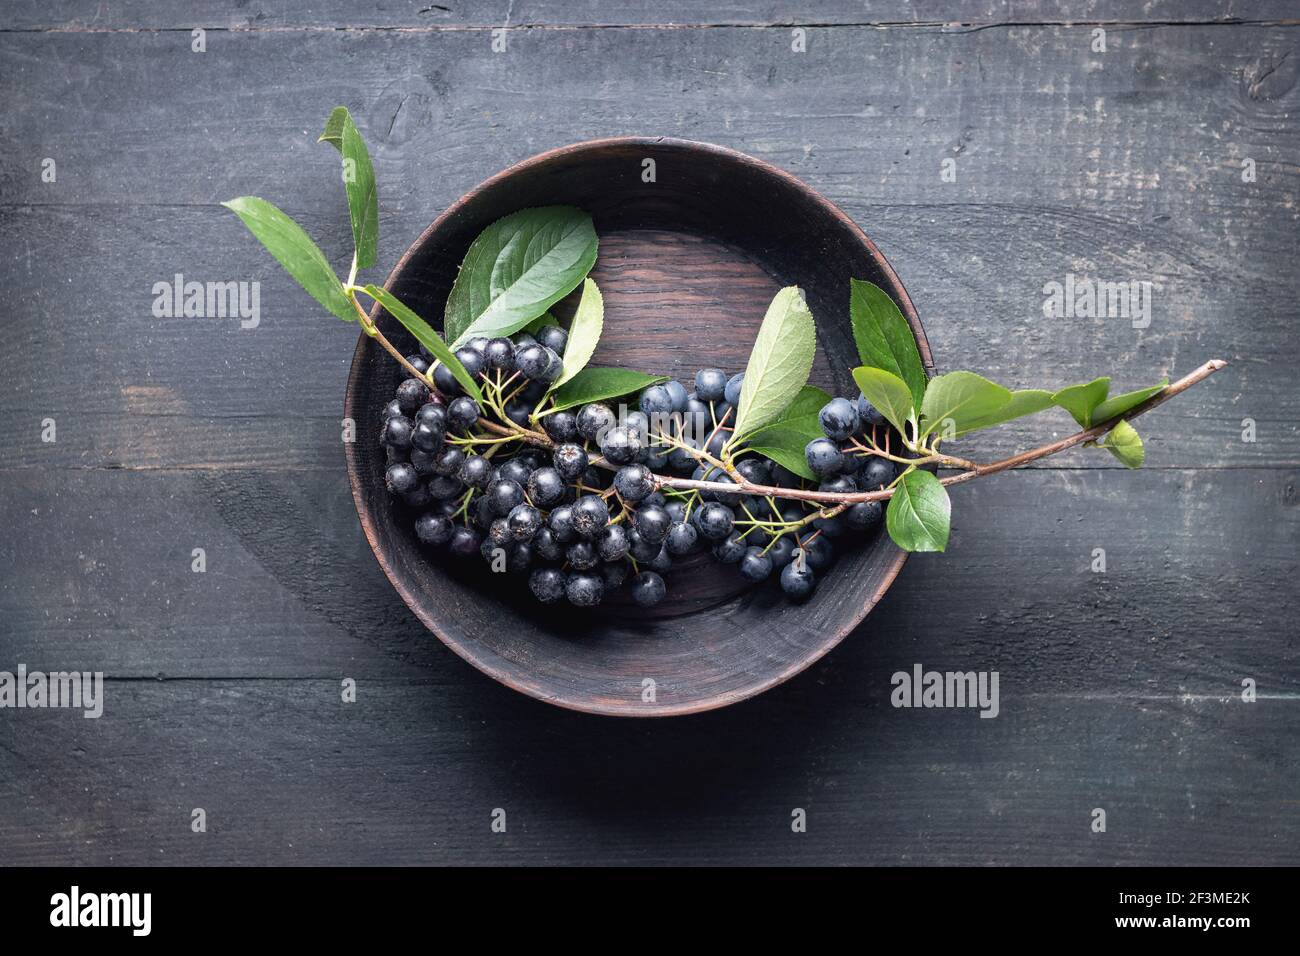 Branch filled with aronia berries,  on wooden table. Stock Photo